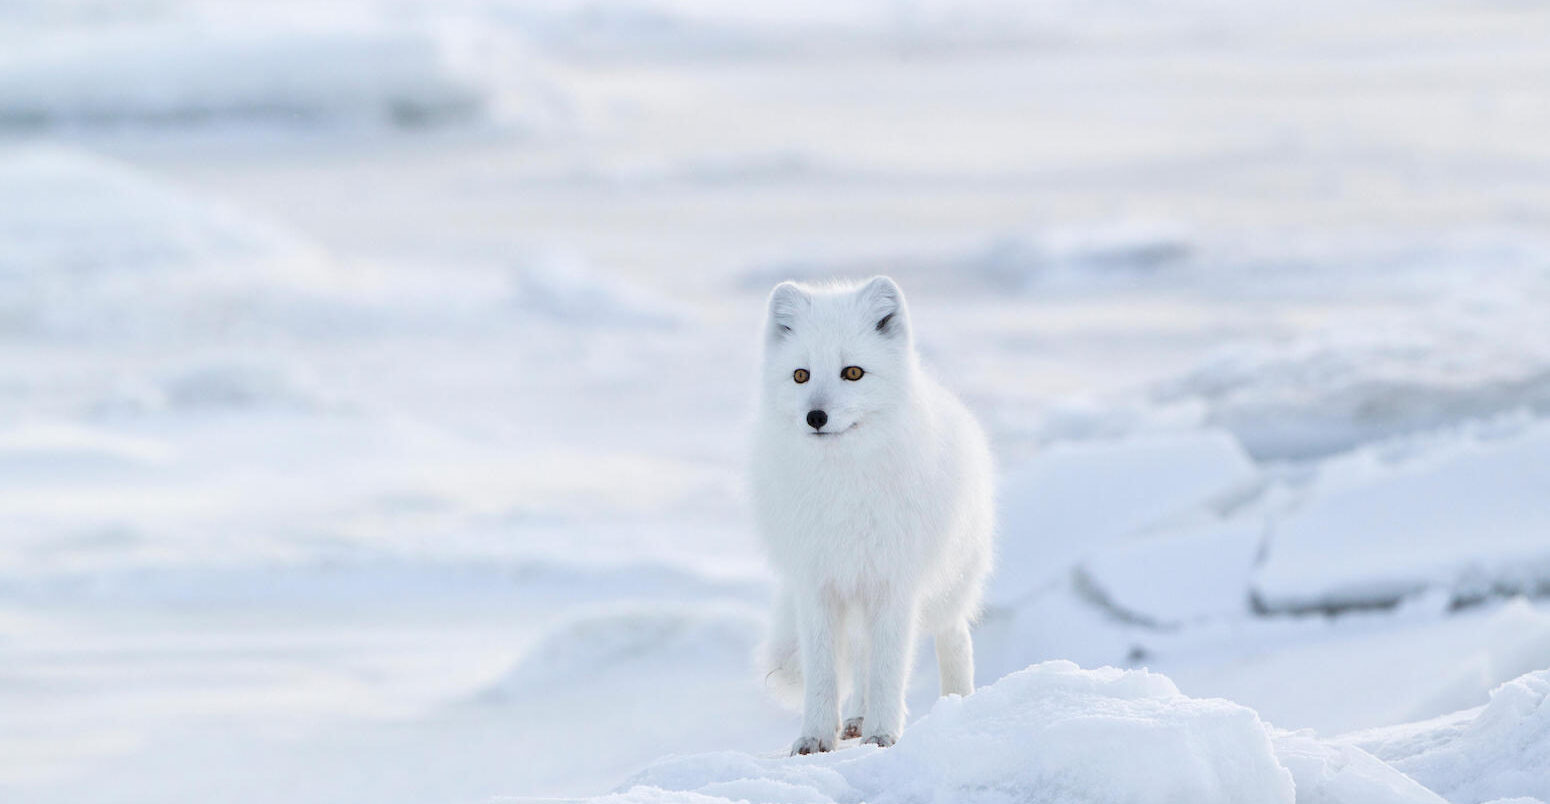 Dwindling sea ice linked to decline of Arctic foxes in Canada's Hudson Bay  - Carbon Brief